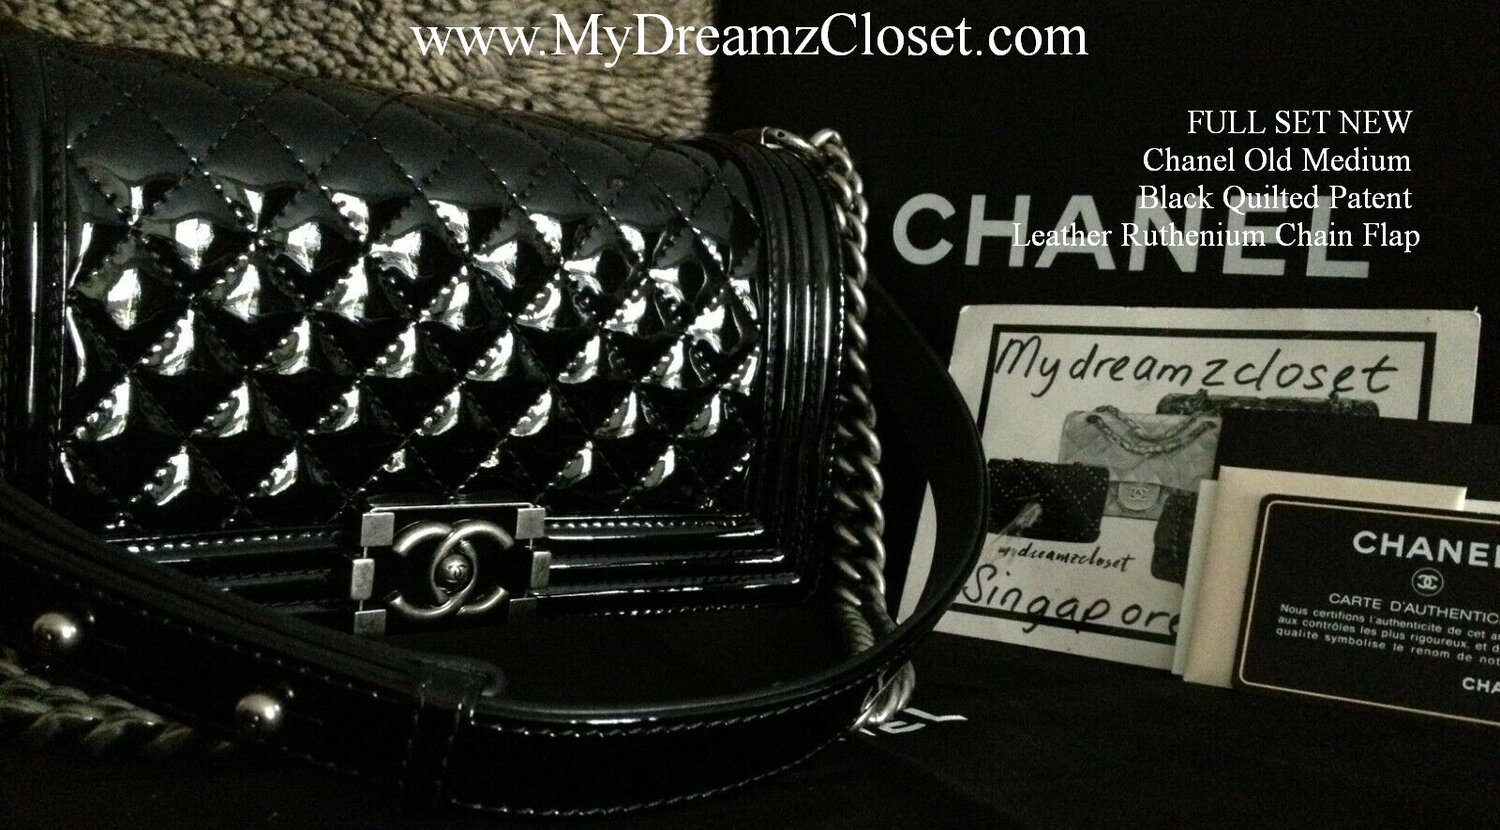 Chanel Red Lambskin Bag - 148 For Sale on 1stDibs